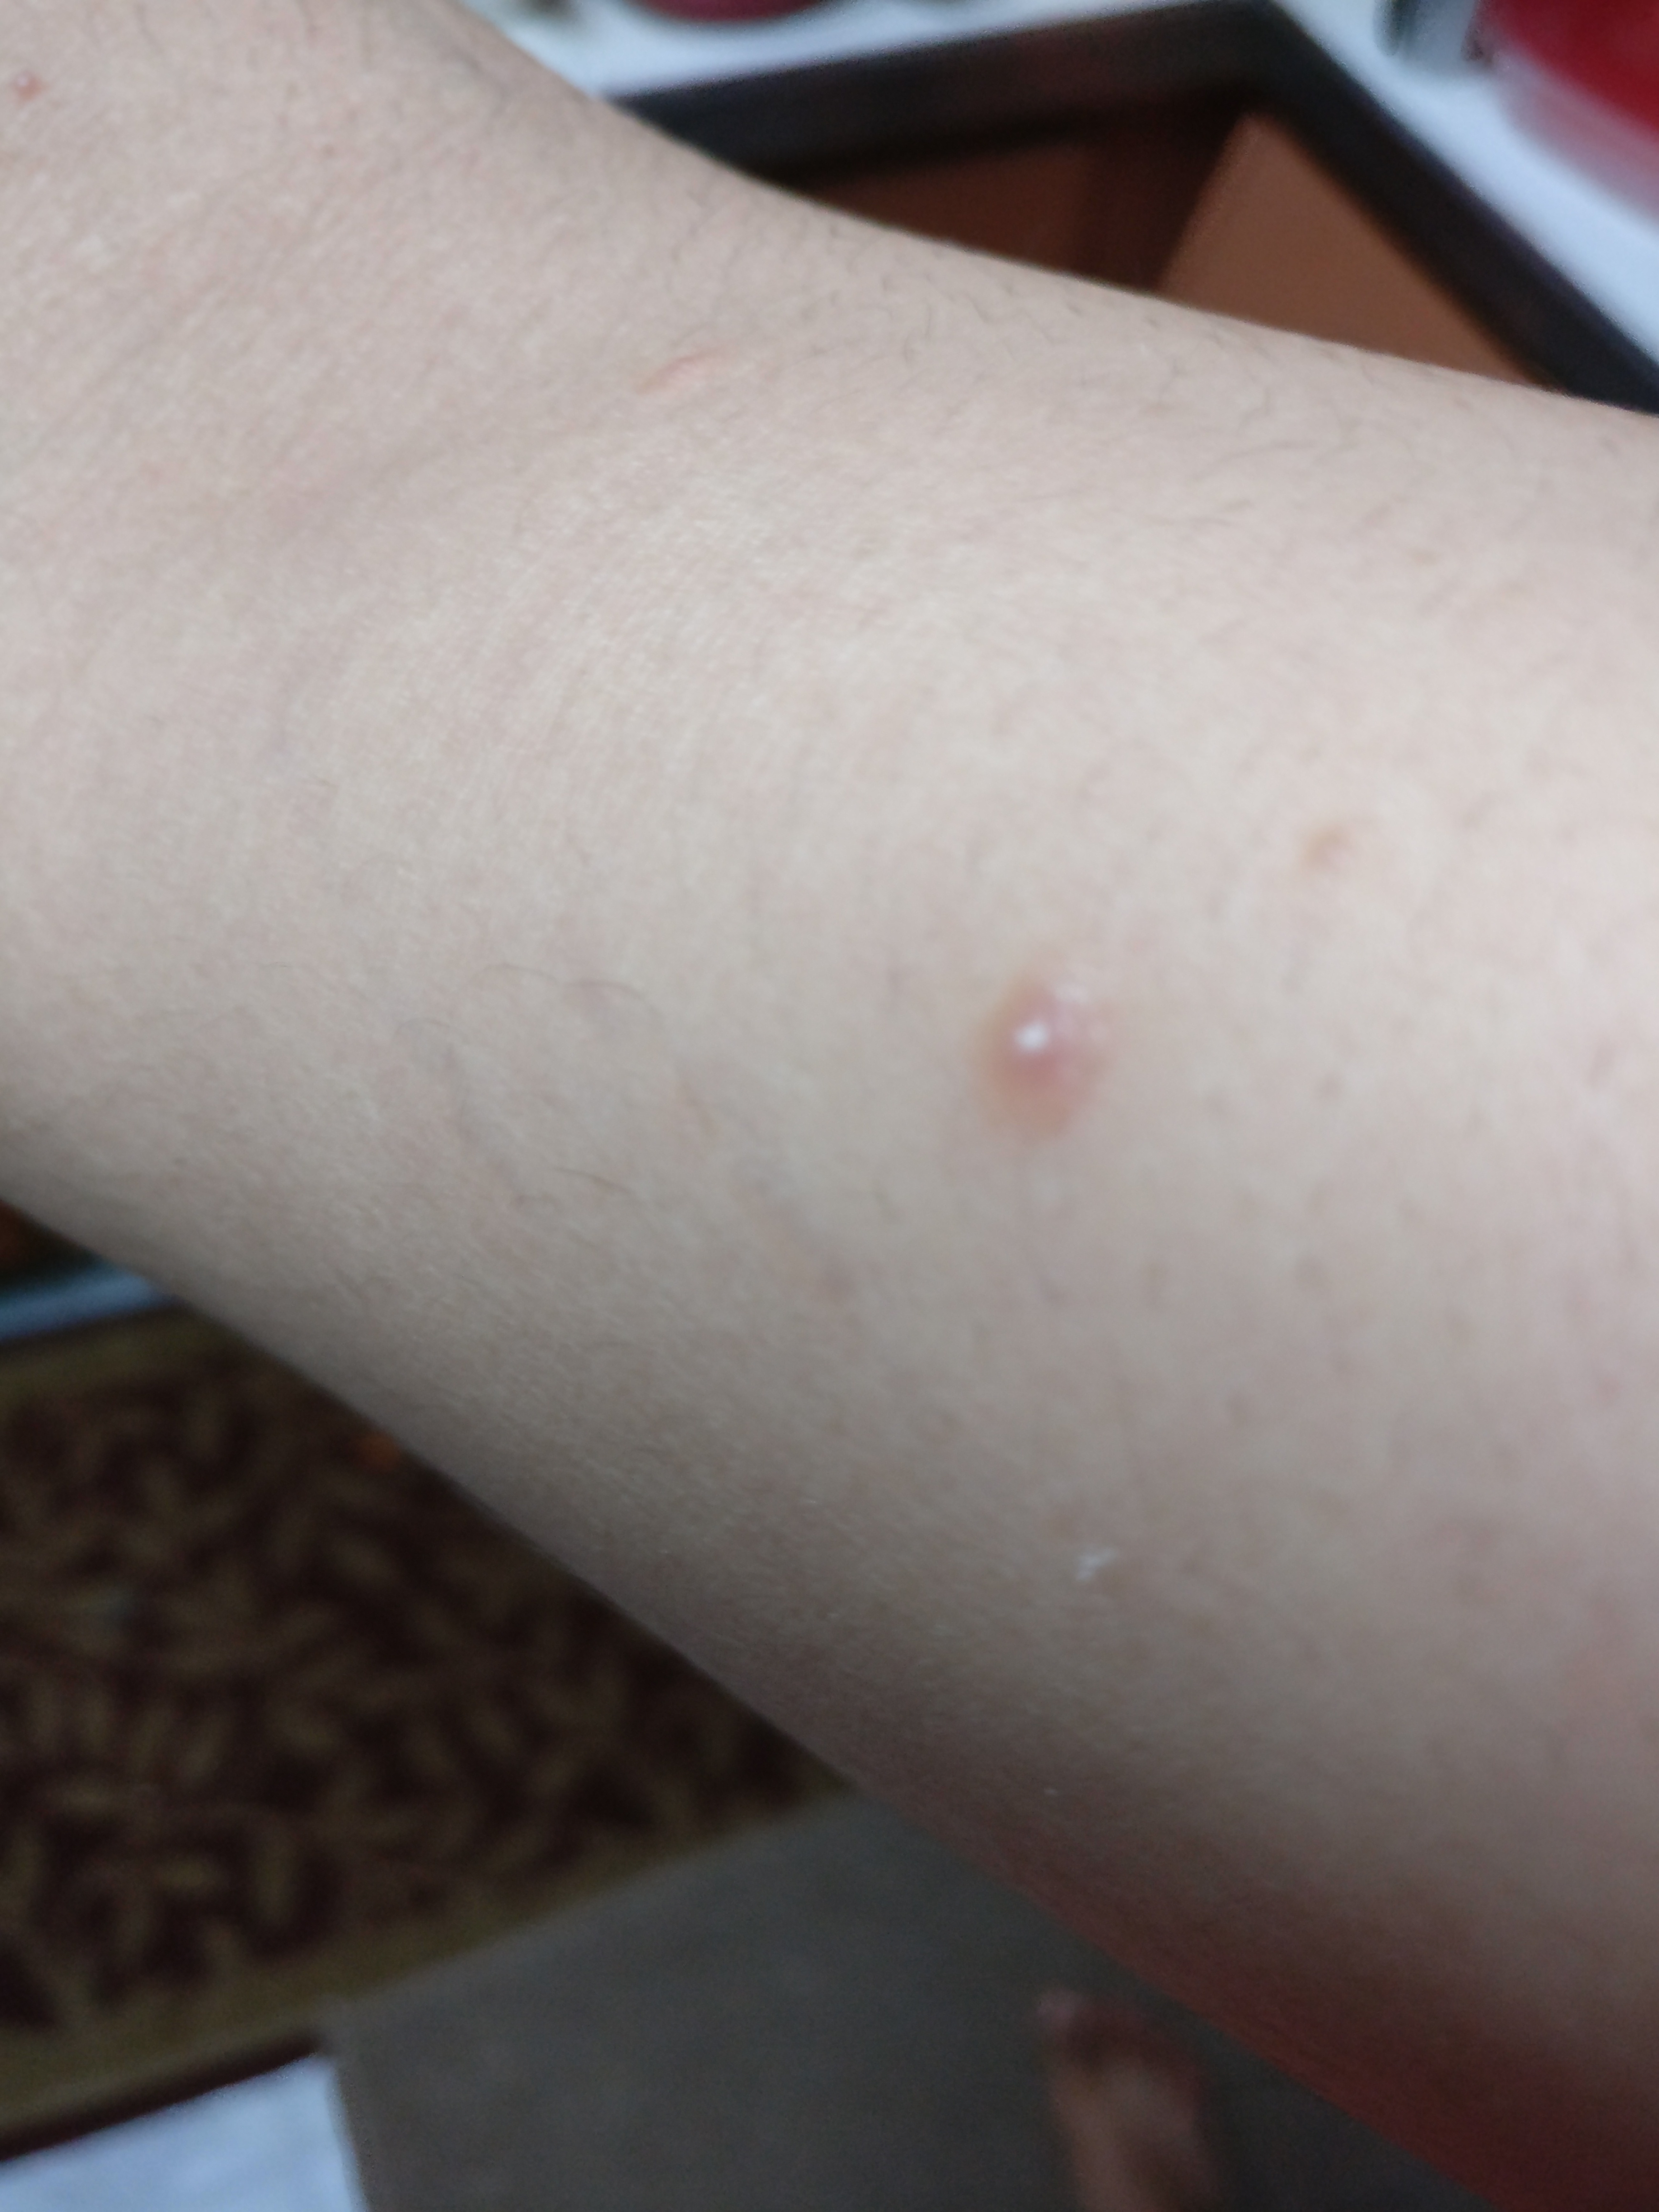 What Is This Ive Had This Pimple On My Arm For A Few A While Now